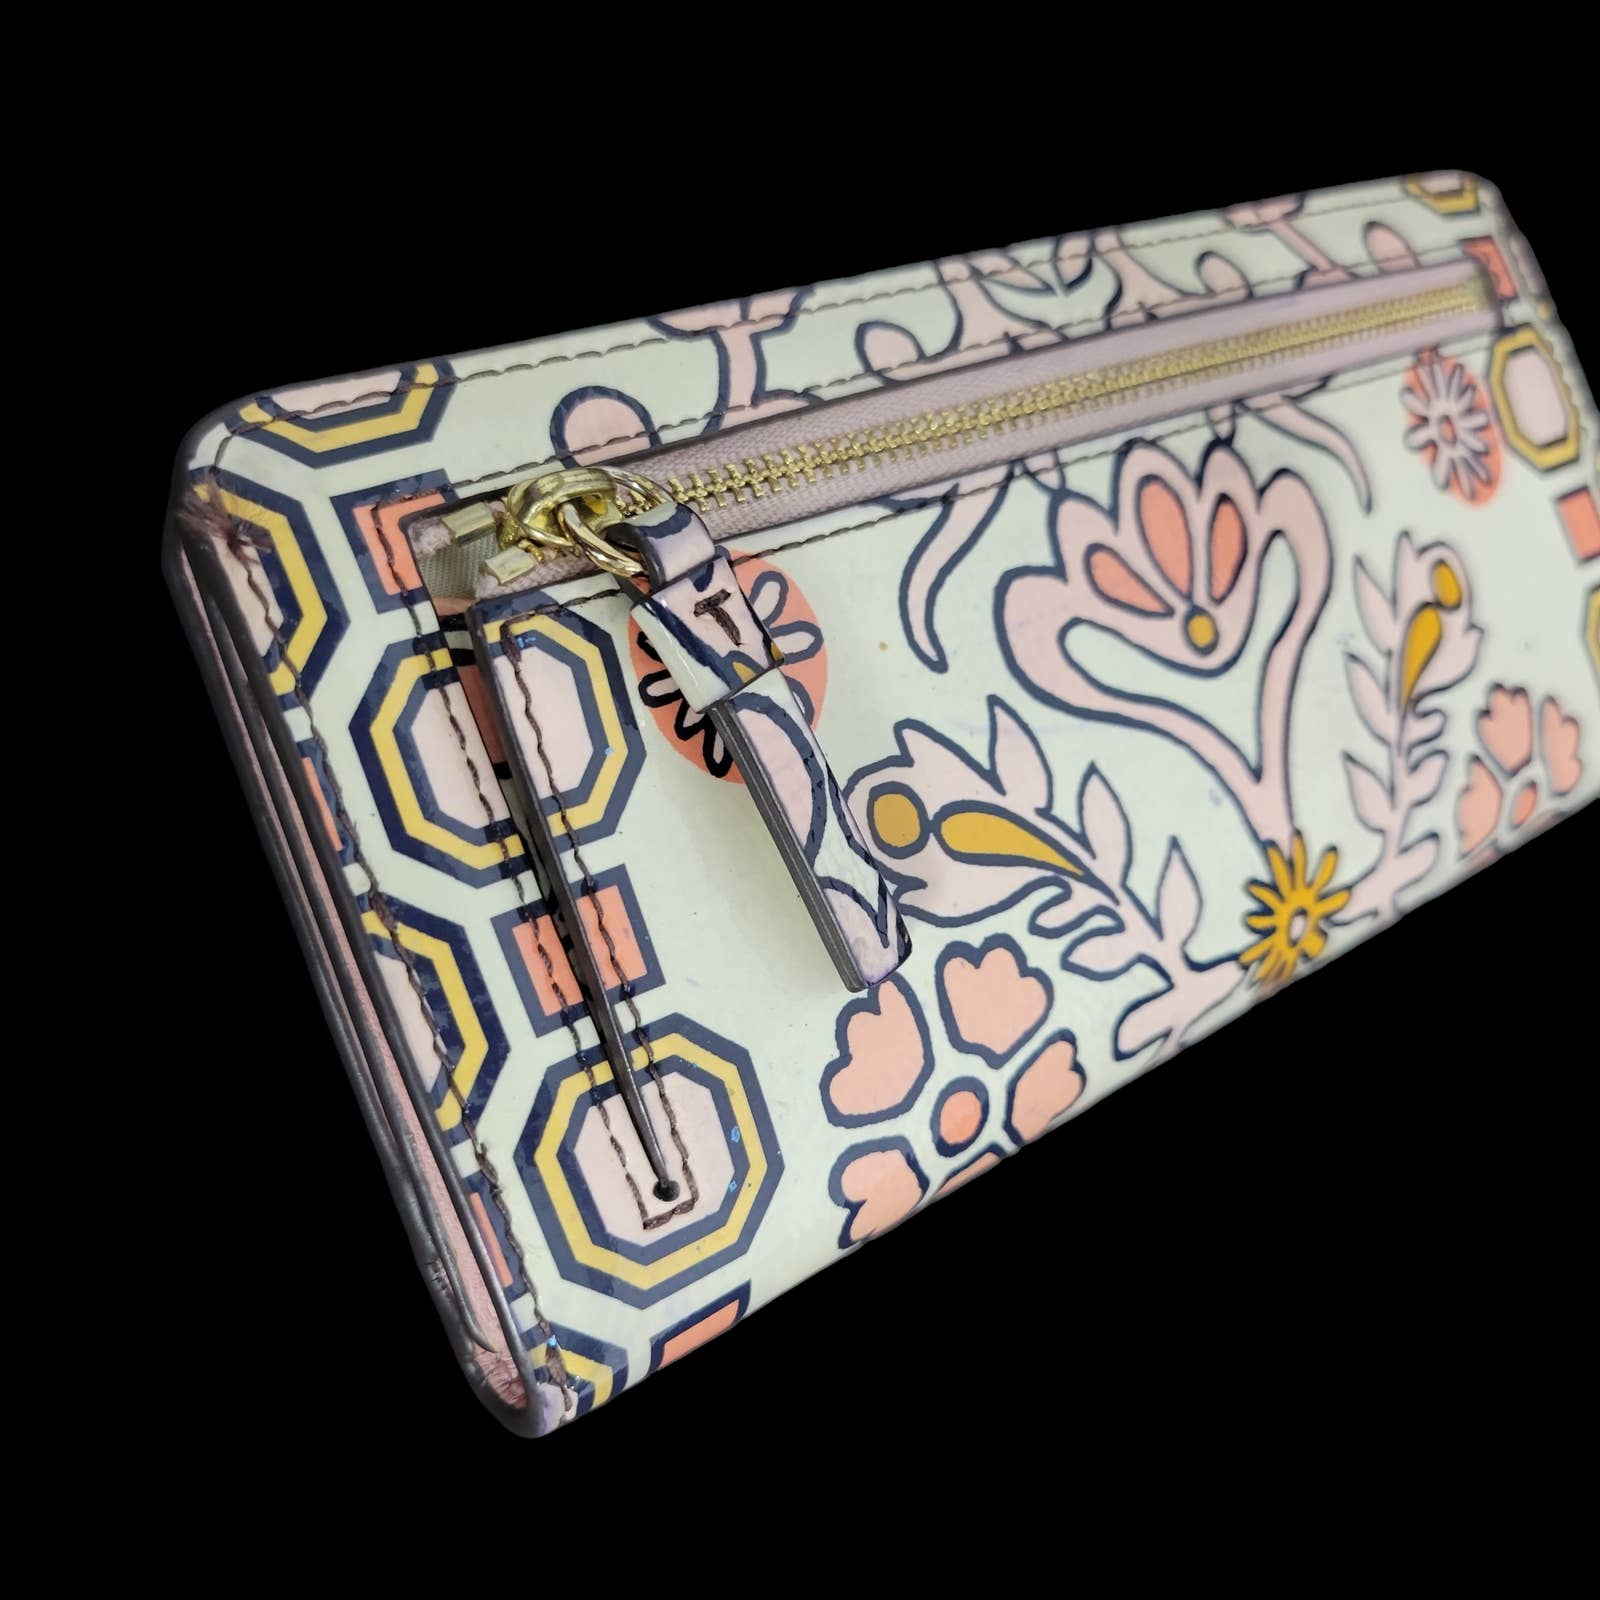 Tory Burch Hicks Garden Party Wallet Pink Slim Envelope Patent Leather Floral Printed